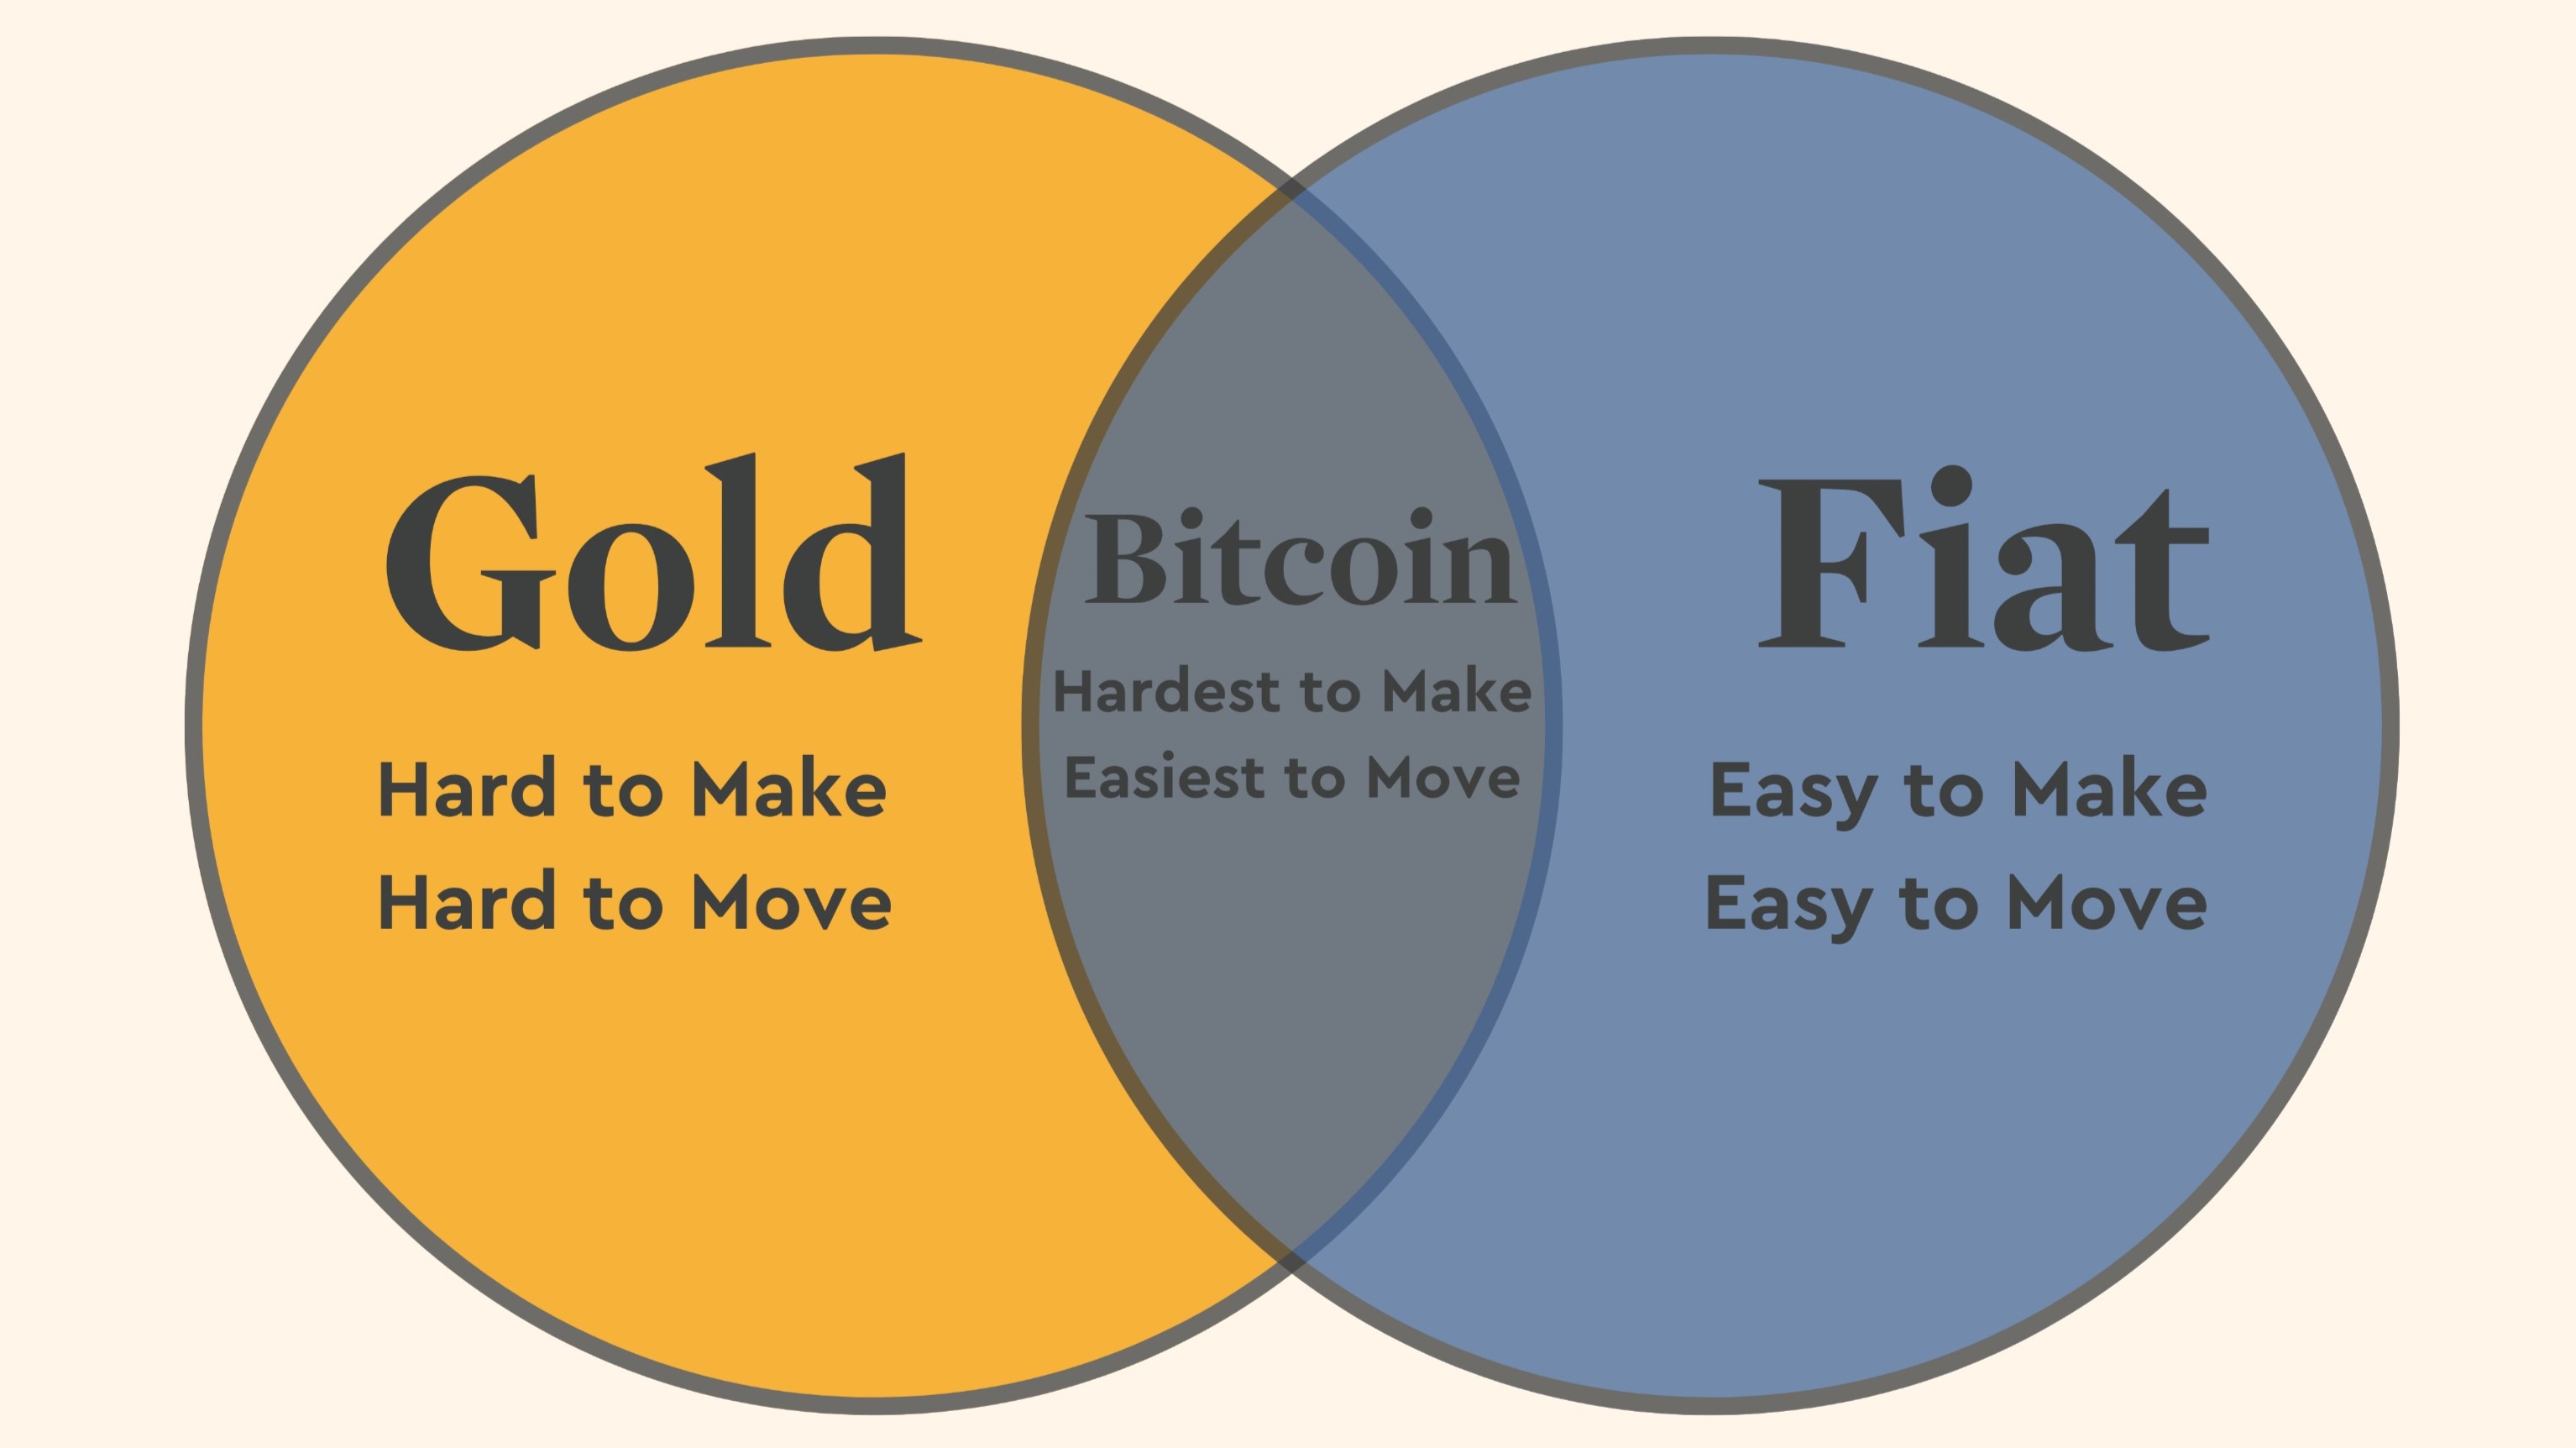 Gold Fiat
Hard to Make Easy to Make
Hard to Move Easy to Mov